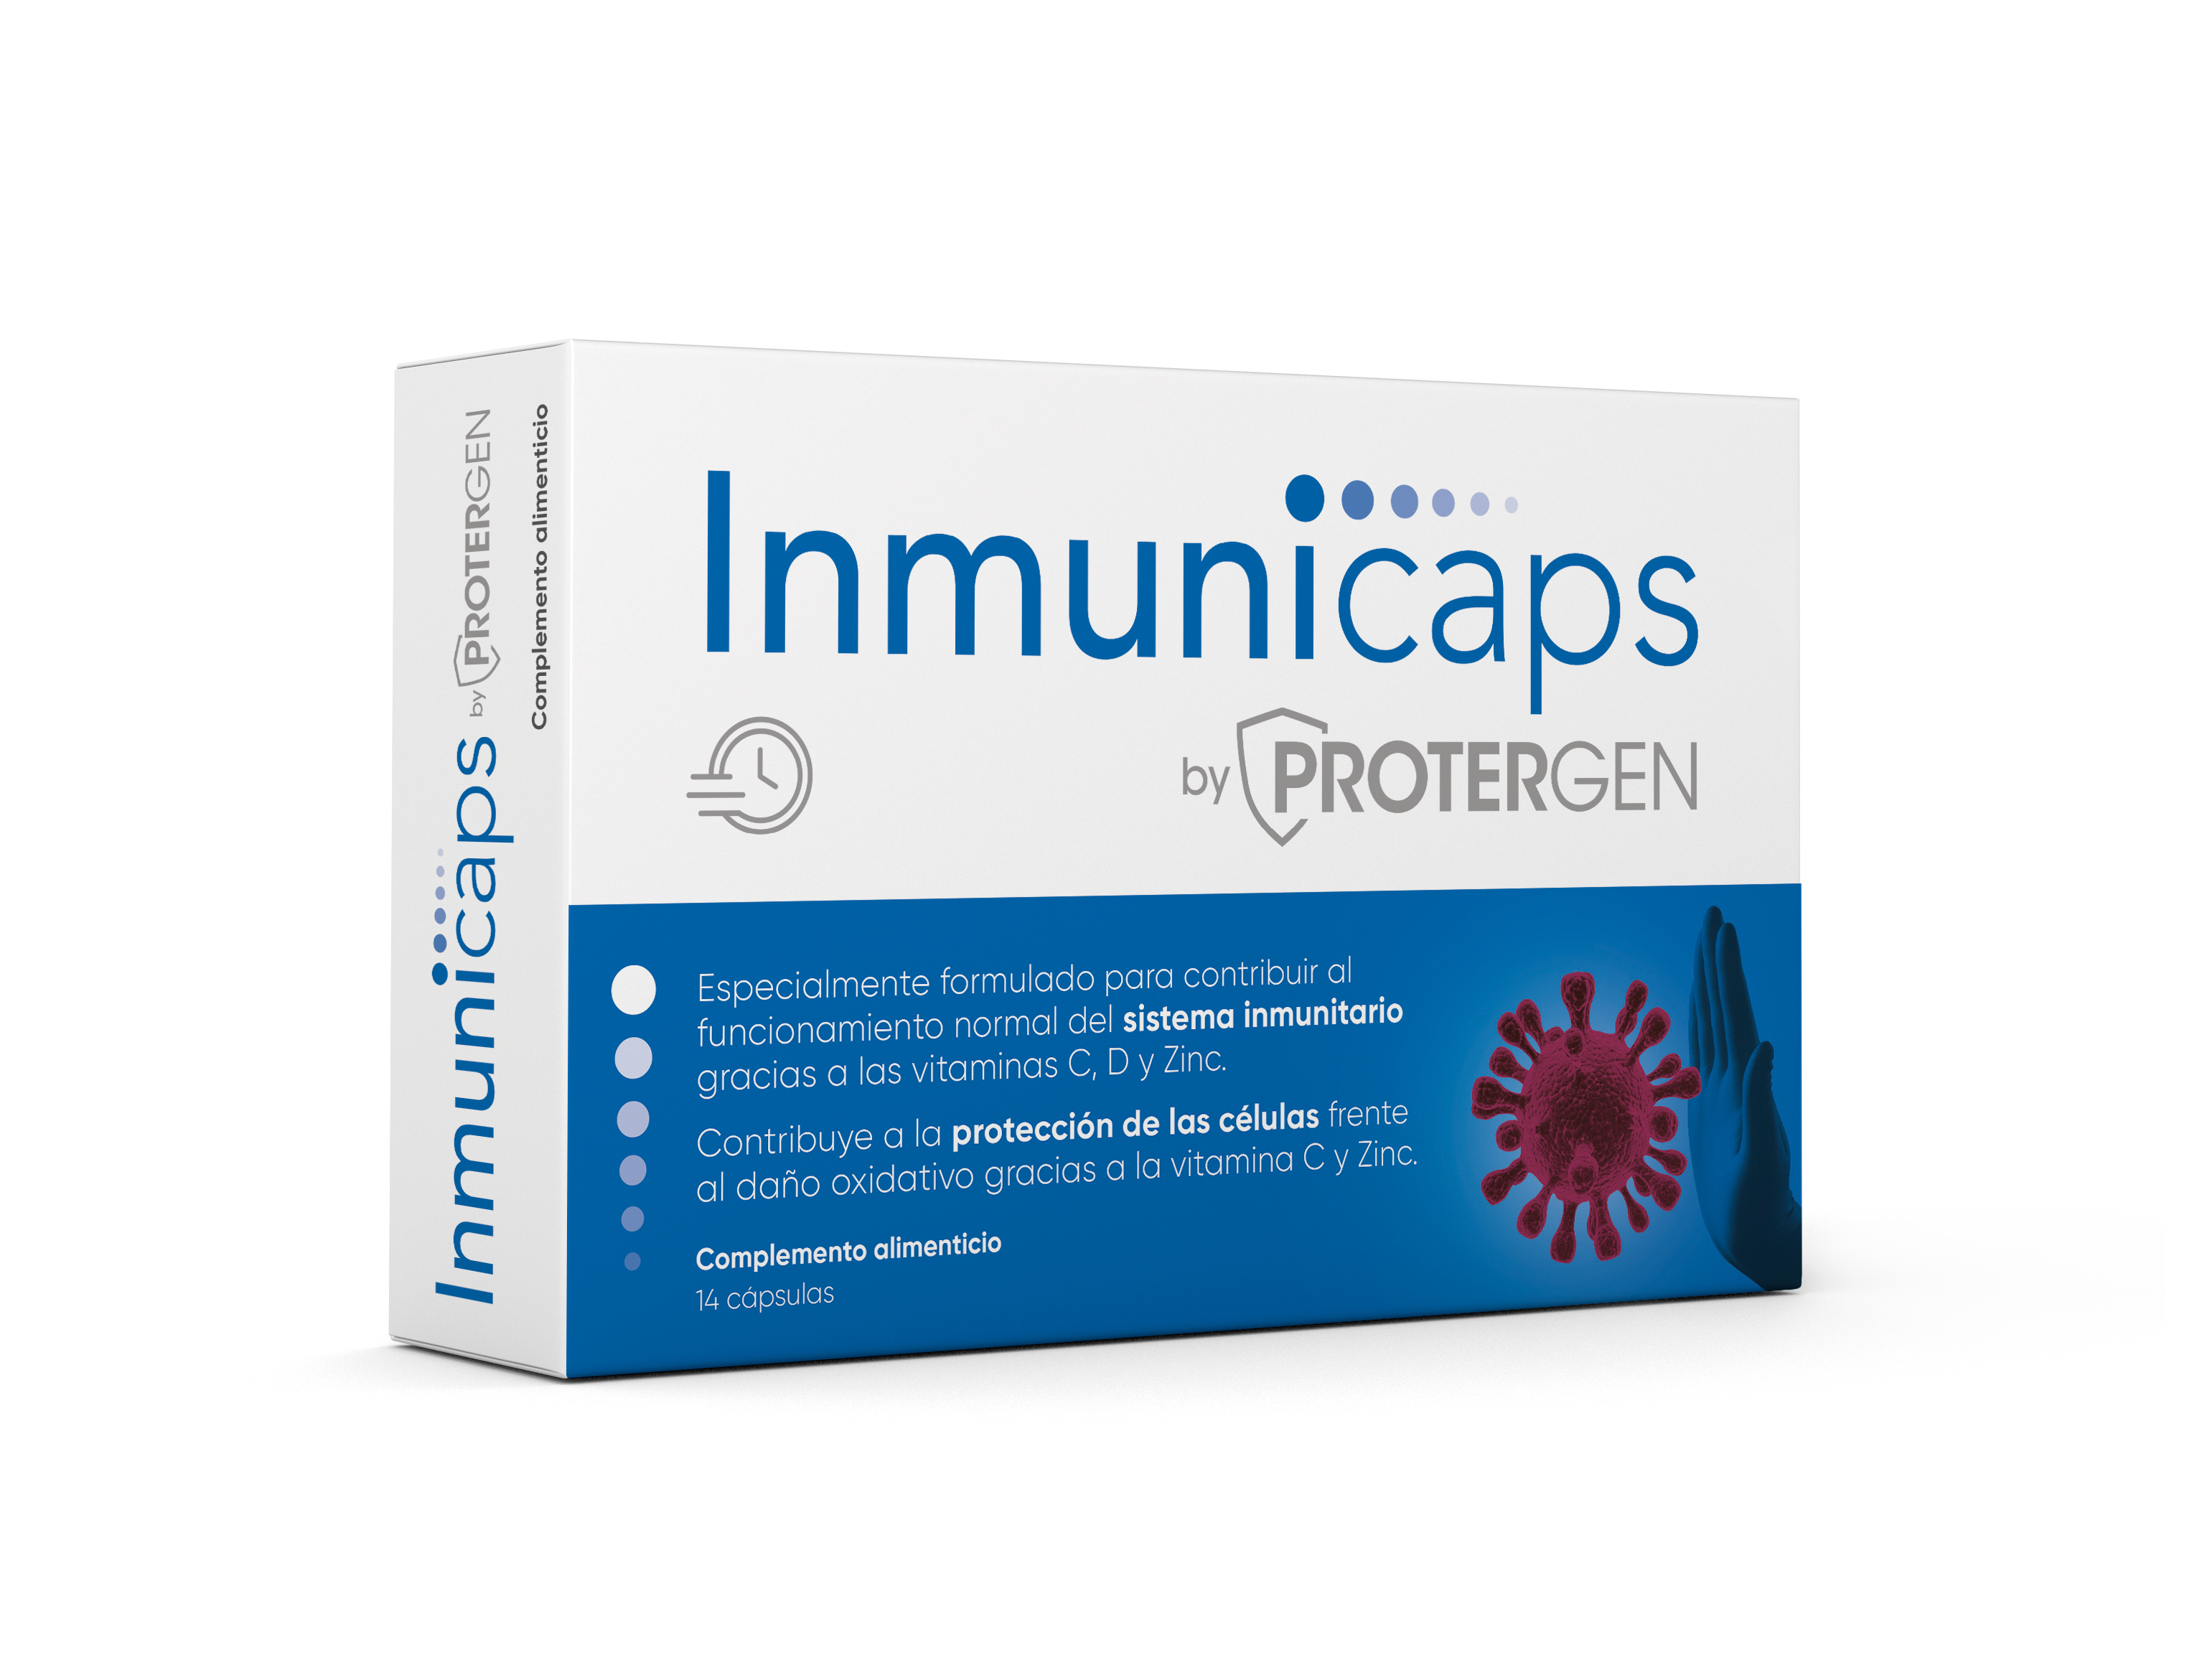 Areafar launches Inmunicaps, a product exclusively for pharmacies.